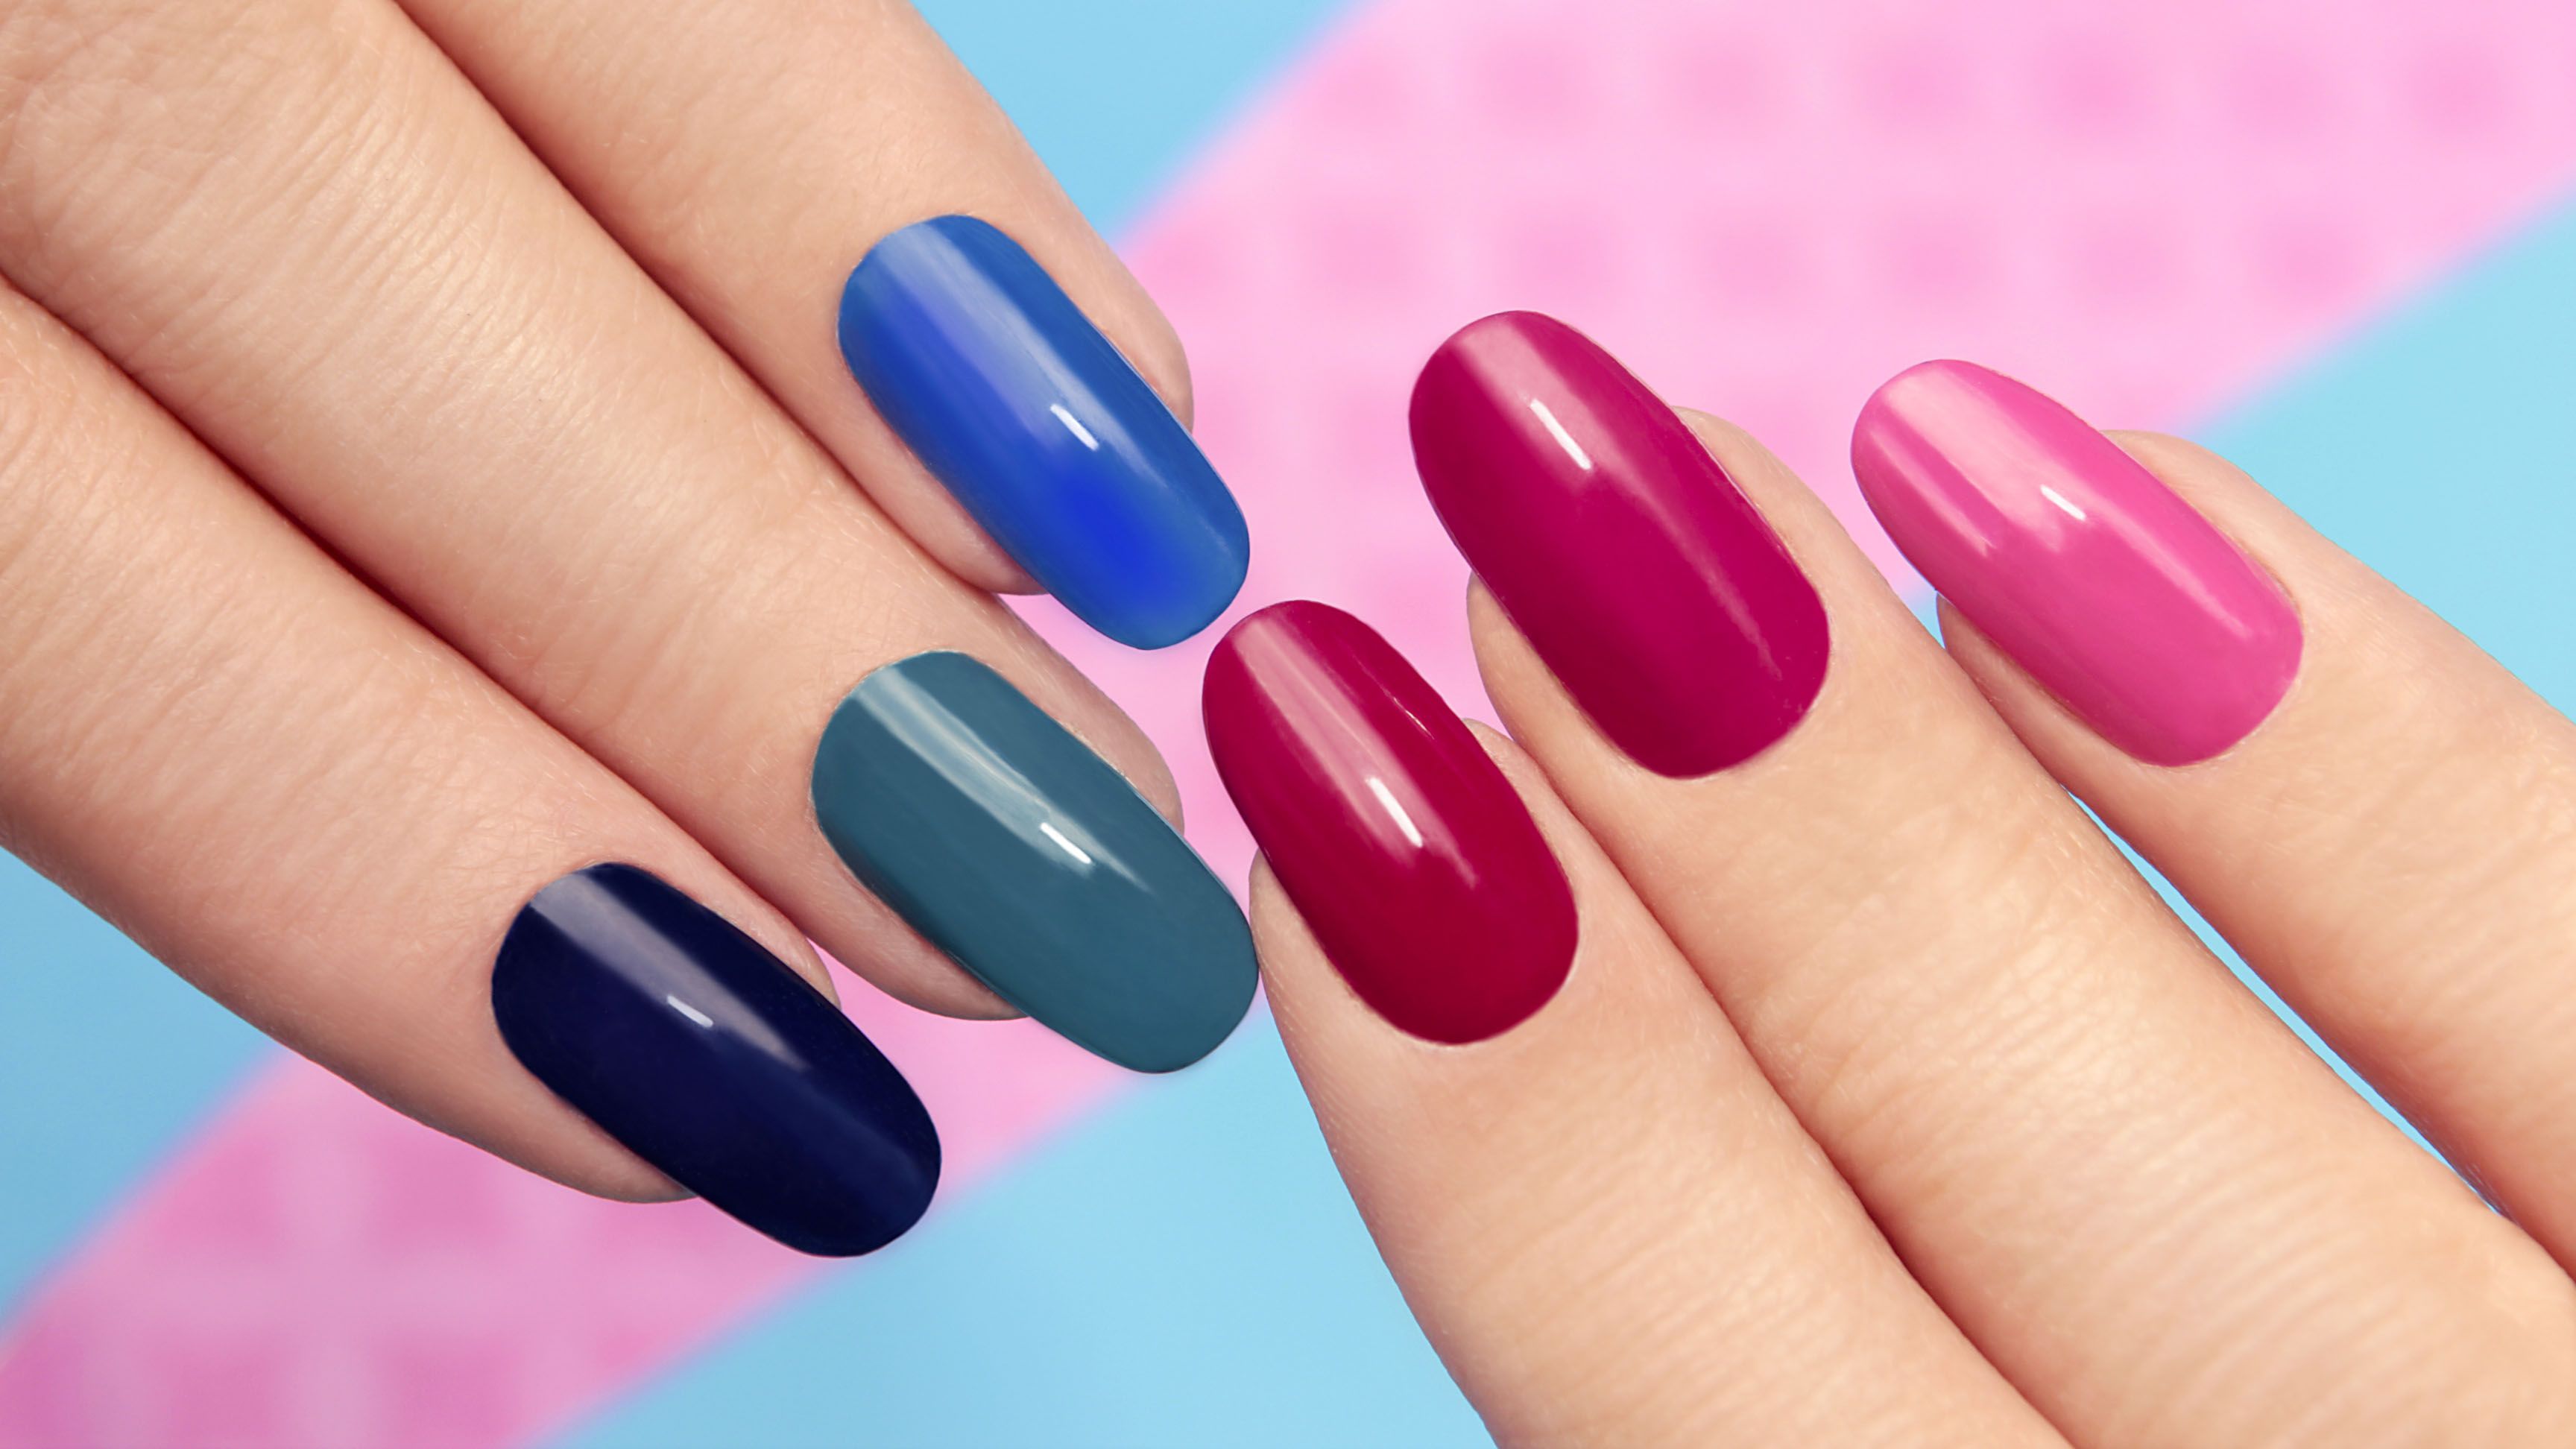 2. Cool Blue Ombre Nails - wide 2